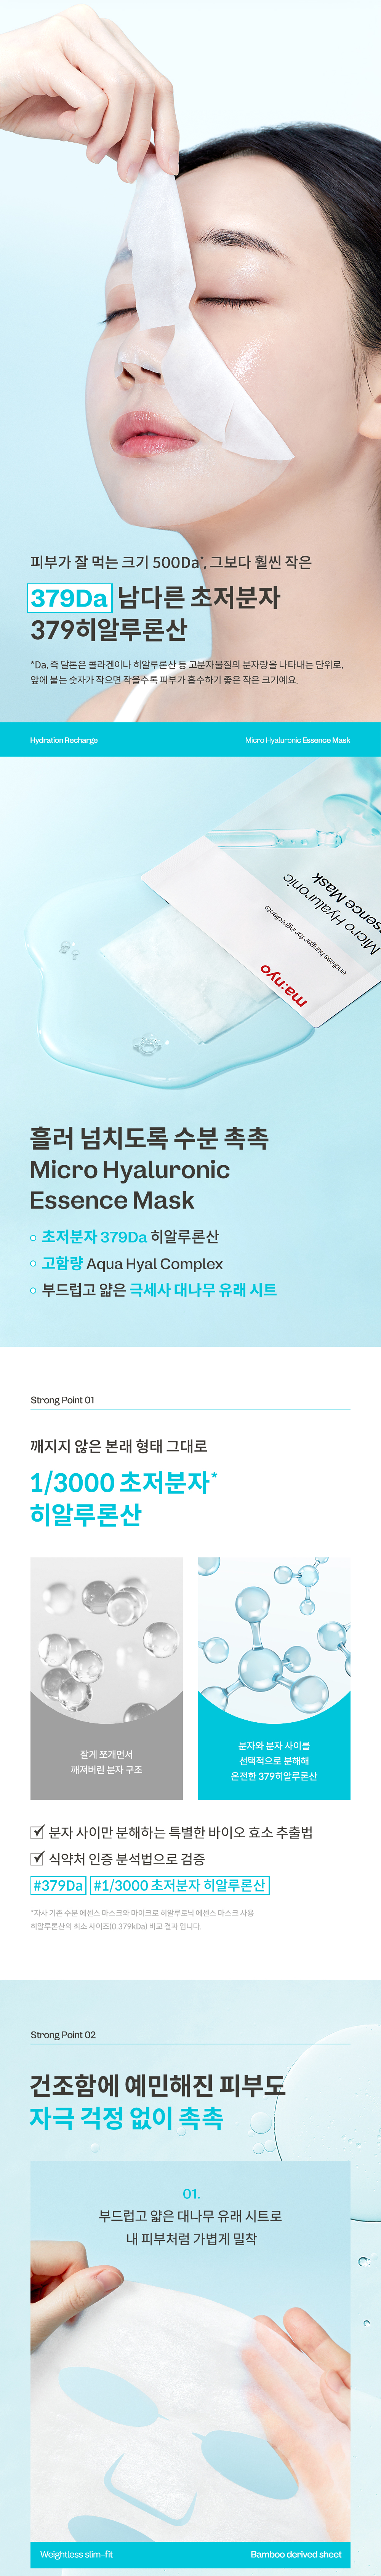 hyaluronic-mask_page_03_140016.jpg